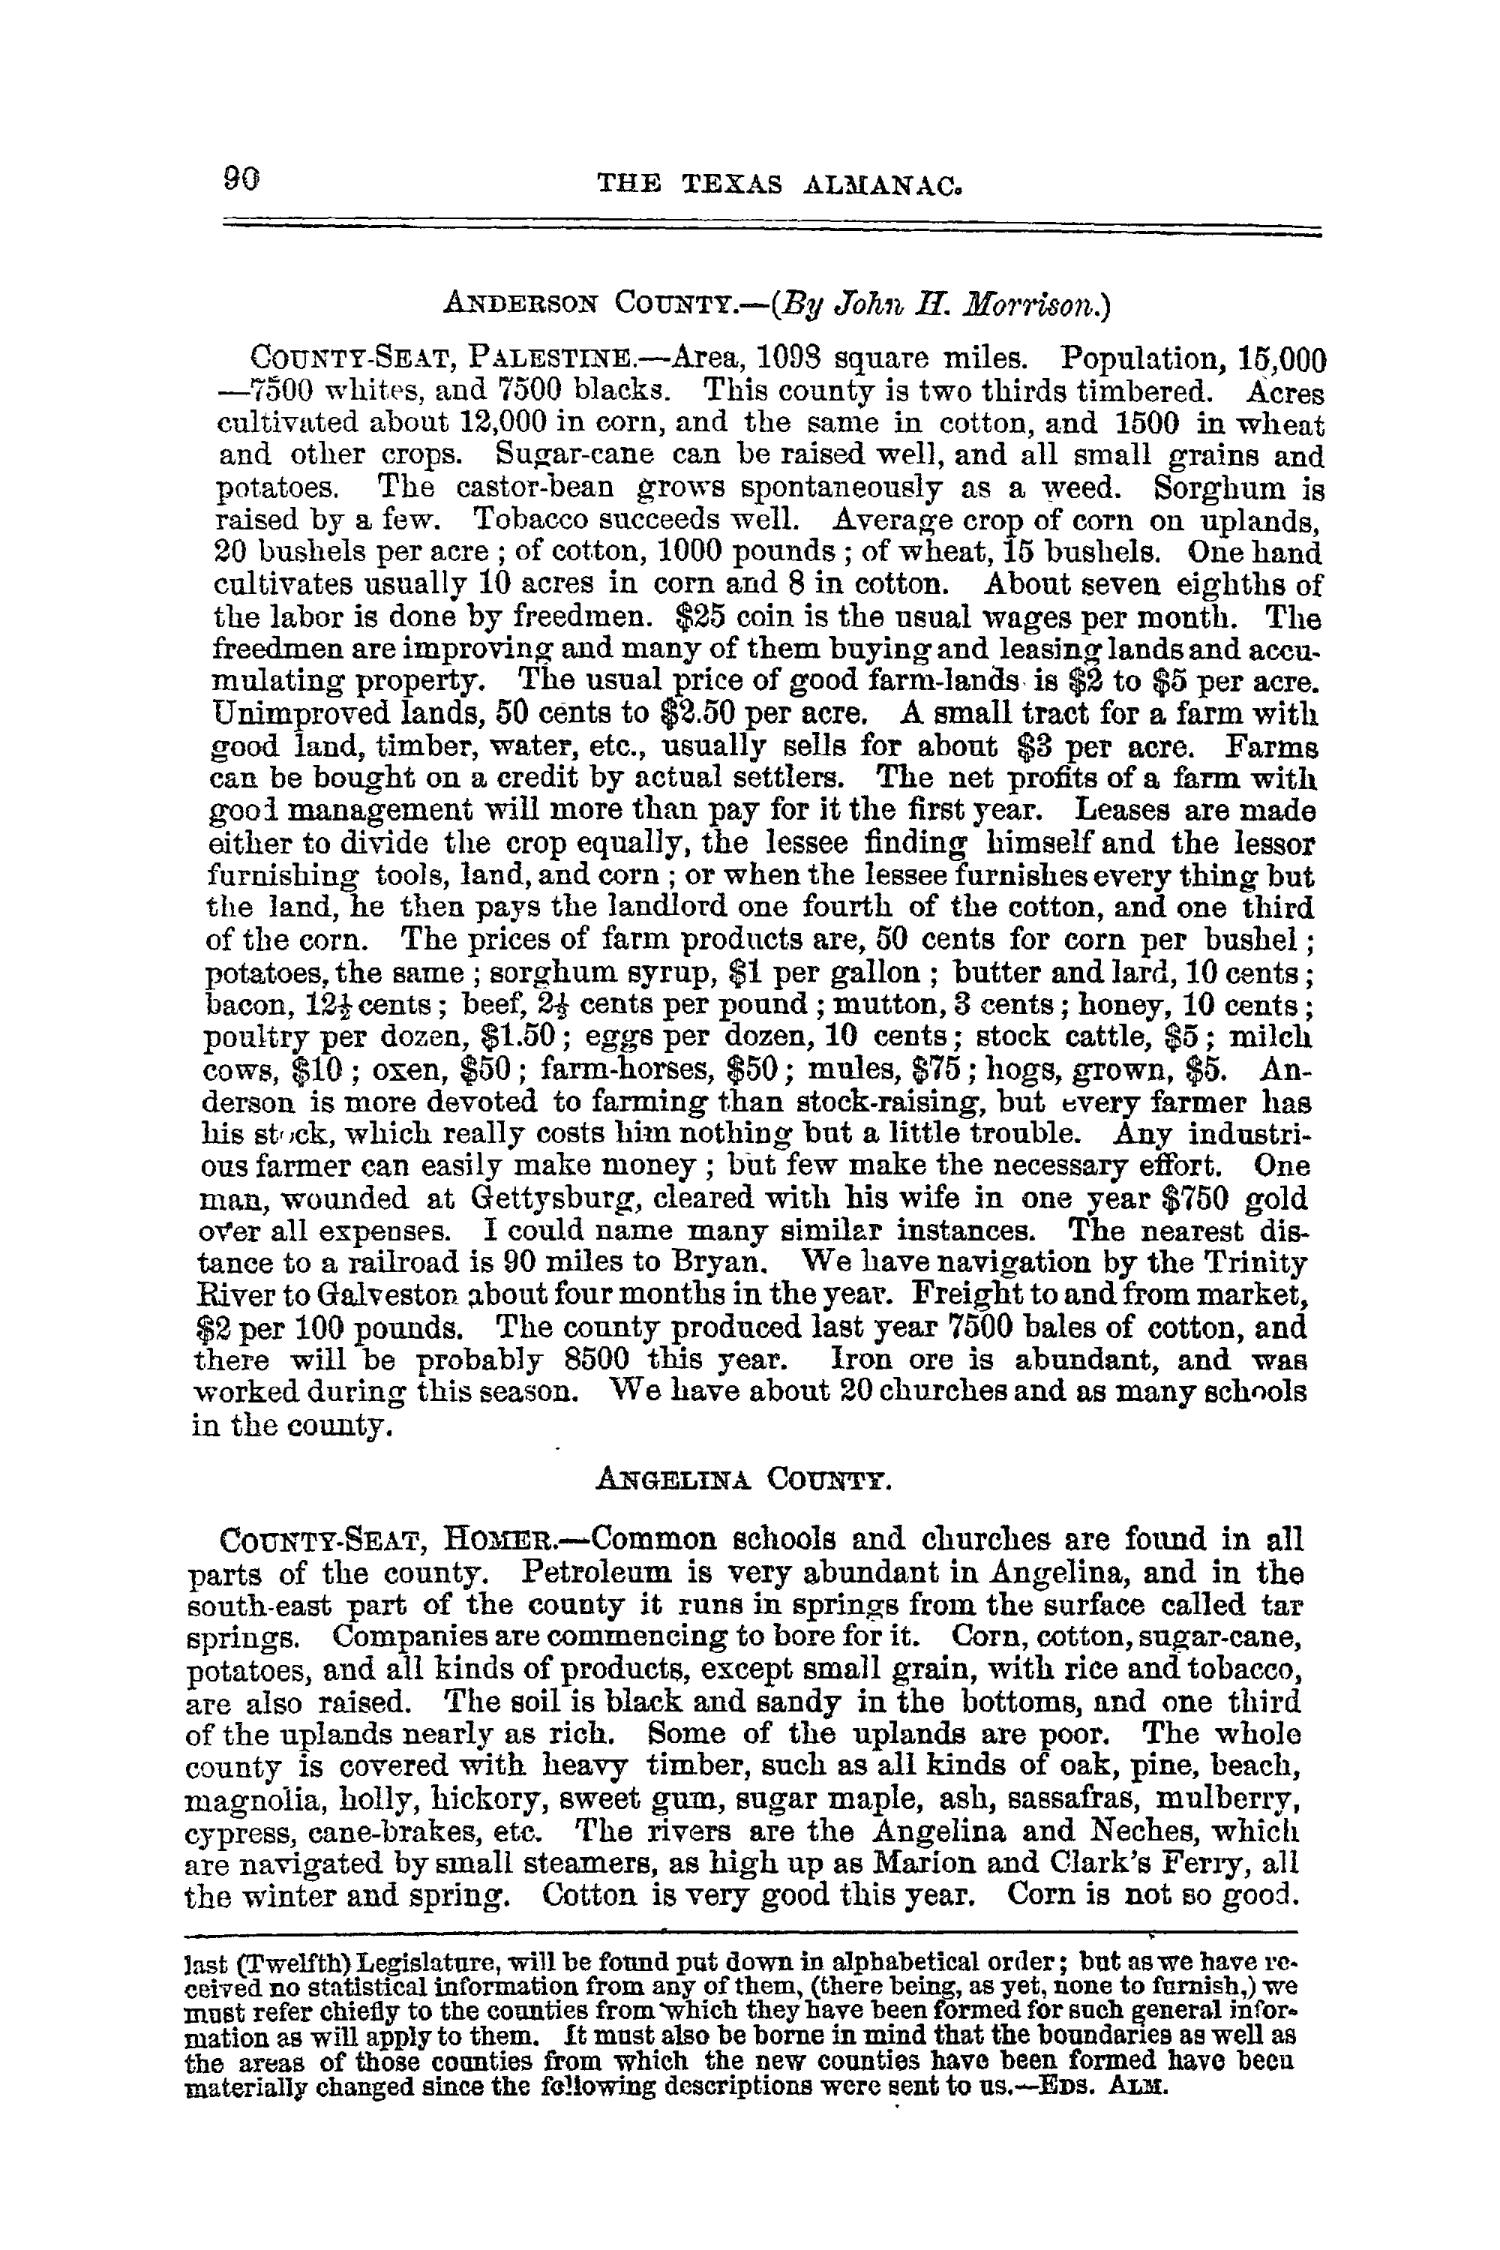 The Texas Almanac for 1871, and Emigrant's Guide to Texas.
                                                
                                                    90
                                                